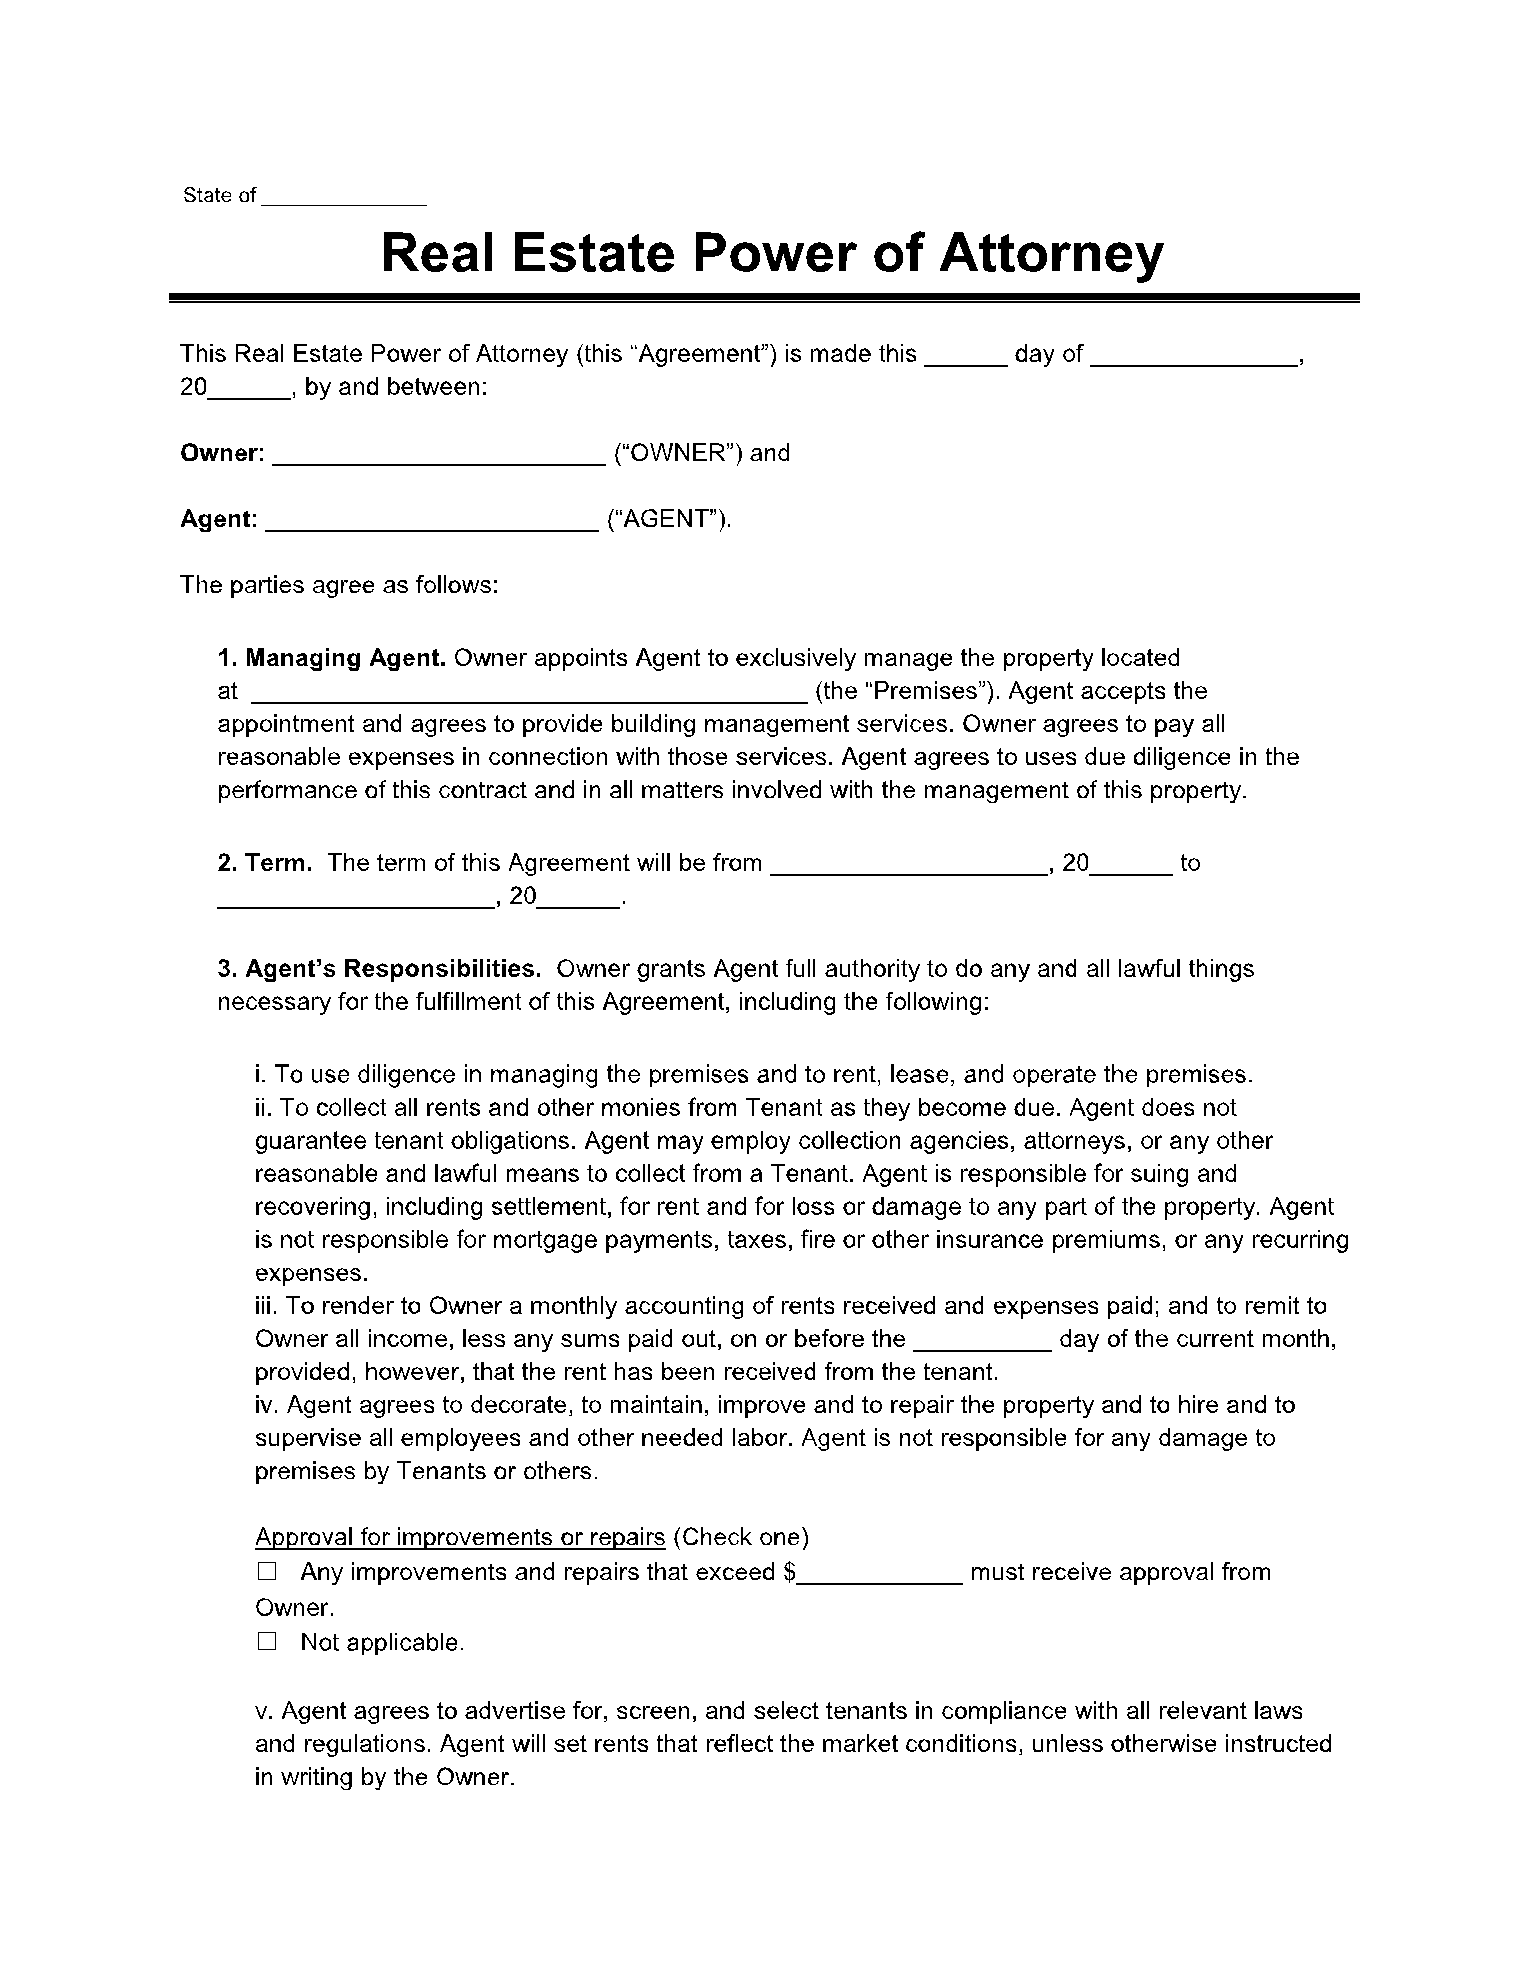 Power of Attorney in Maryland